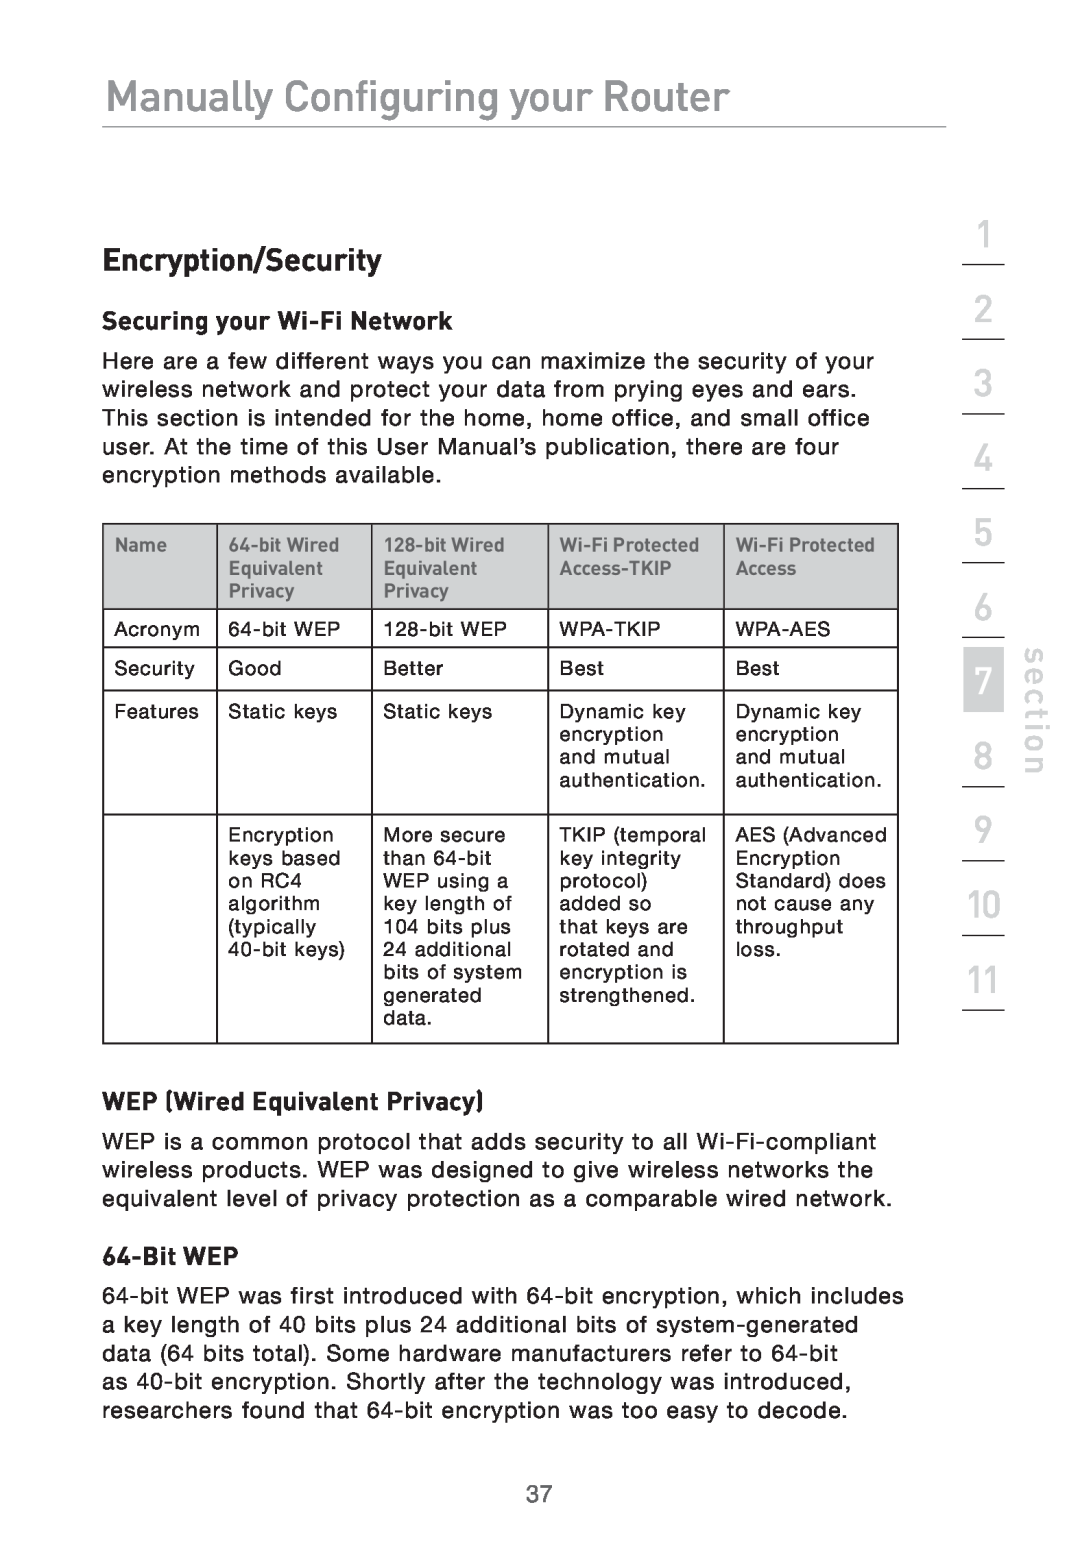 Belkin Pre-N manual Encryption/Security, Securing your Wi-Fi Network, WEP Wired Equivalent Privacy, Bit WEP, section 